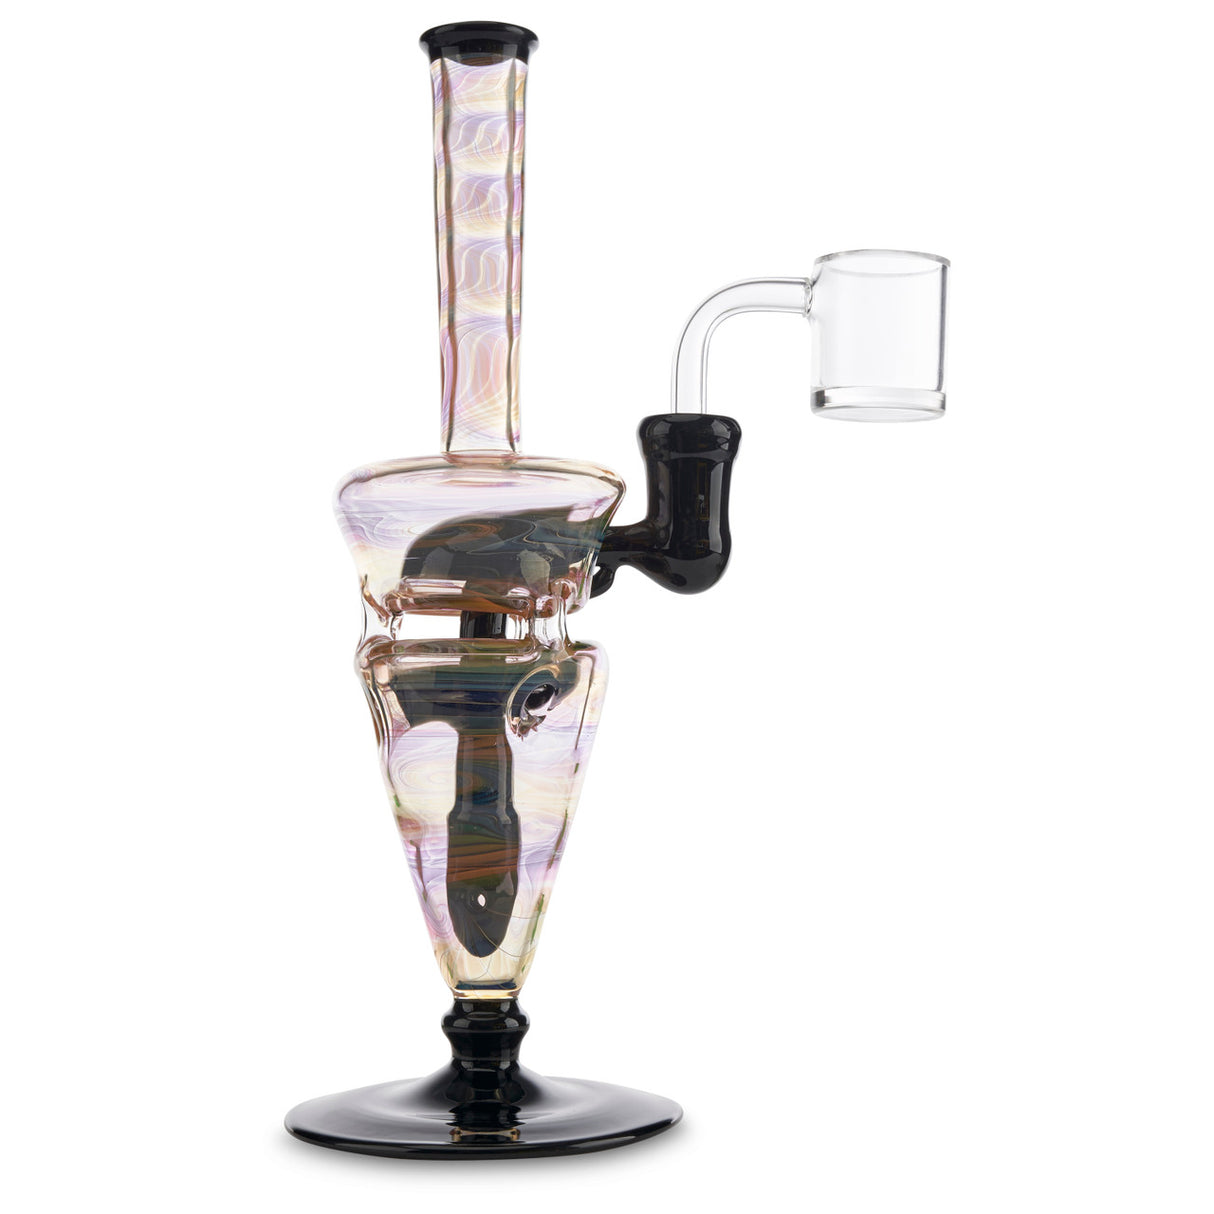 chip x hefe glass venetian egg fumed rig for smoking concentrates